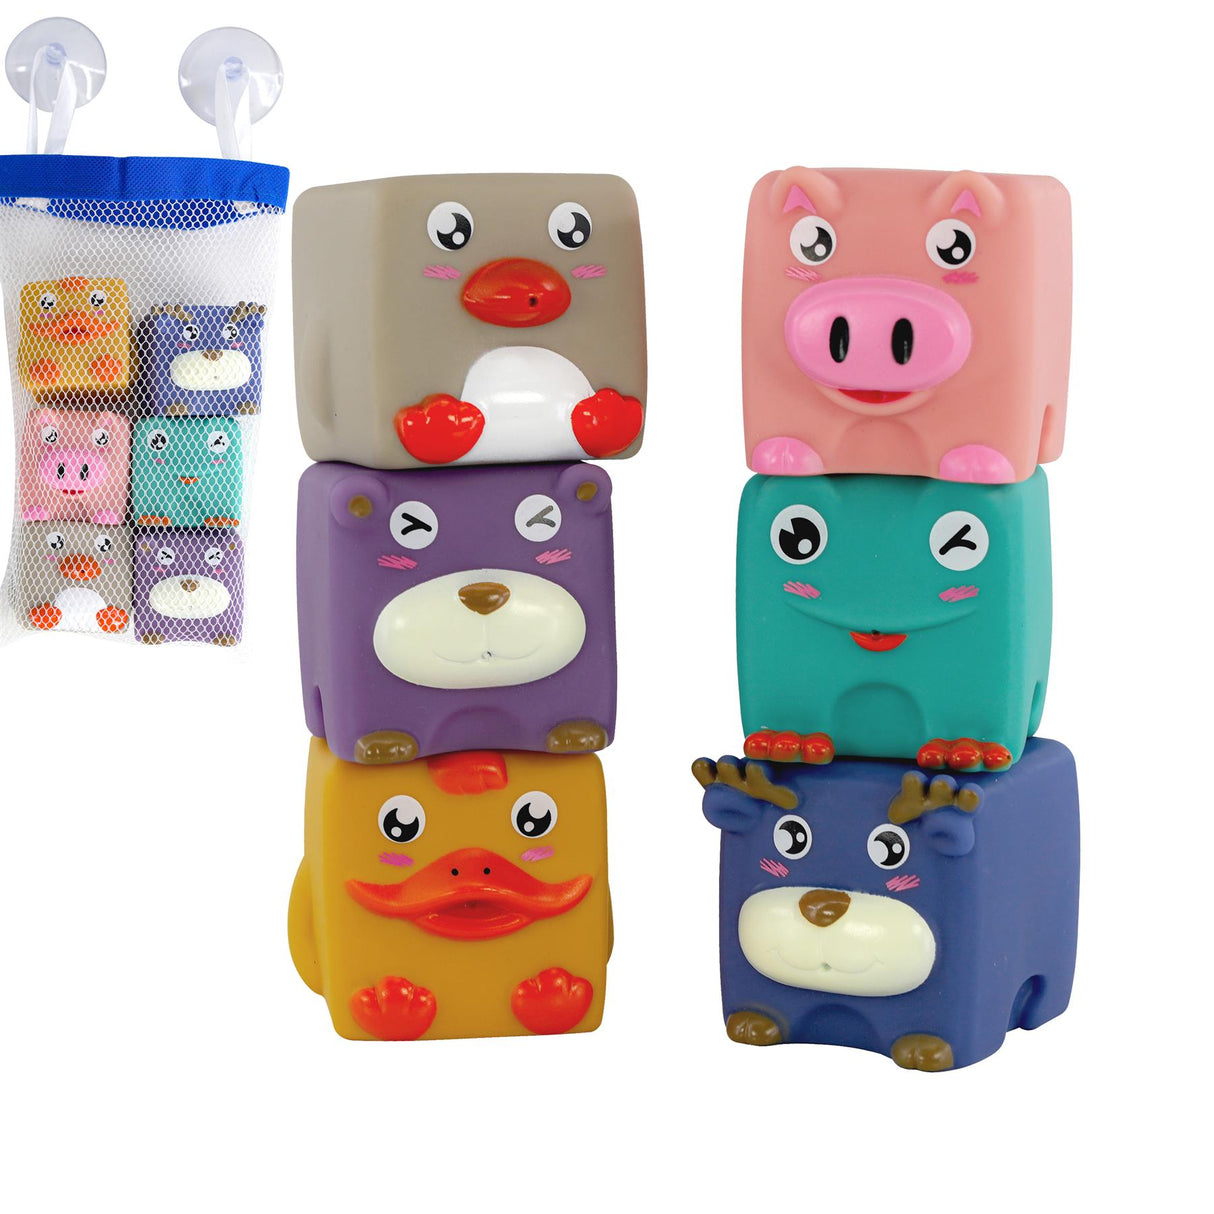 The Magic Toy Shop 6 Pieces Stacking Building Blocks With Squeaky Sound